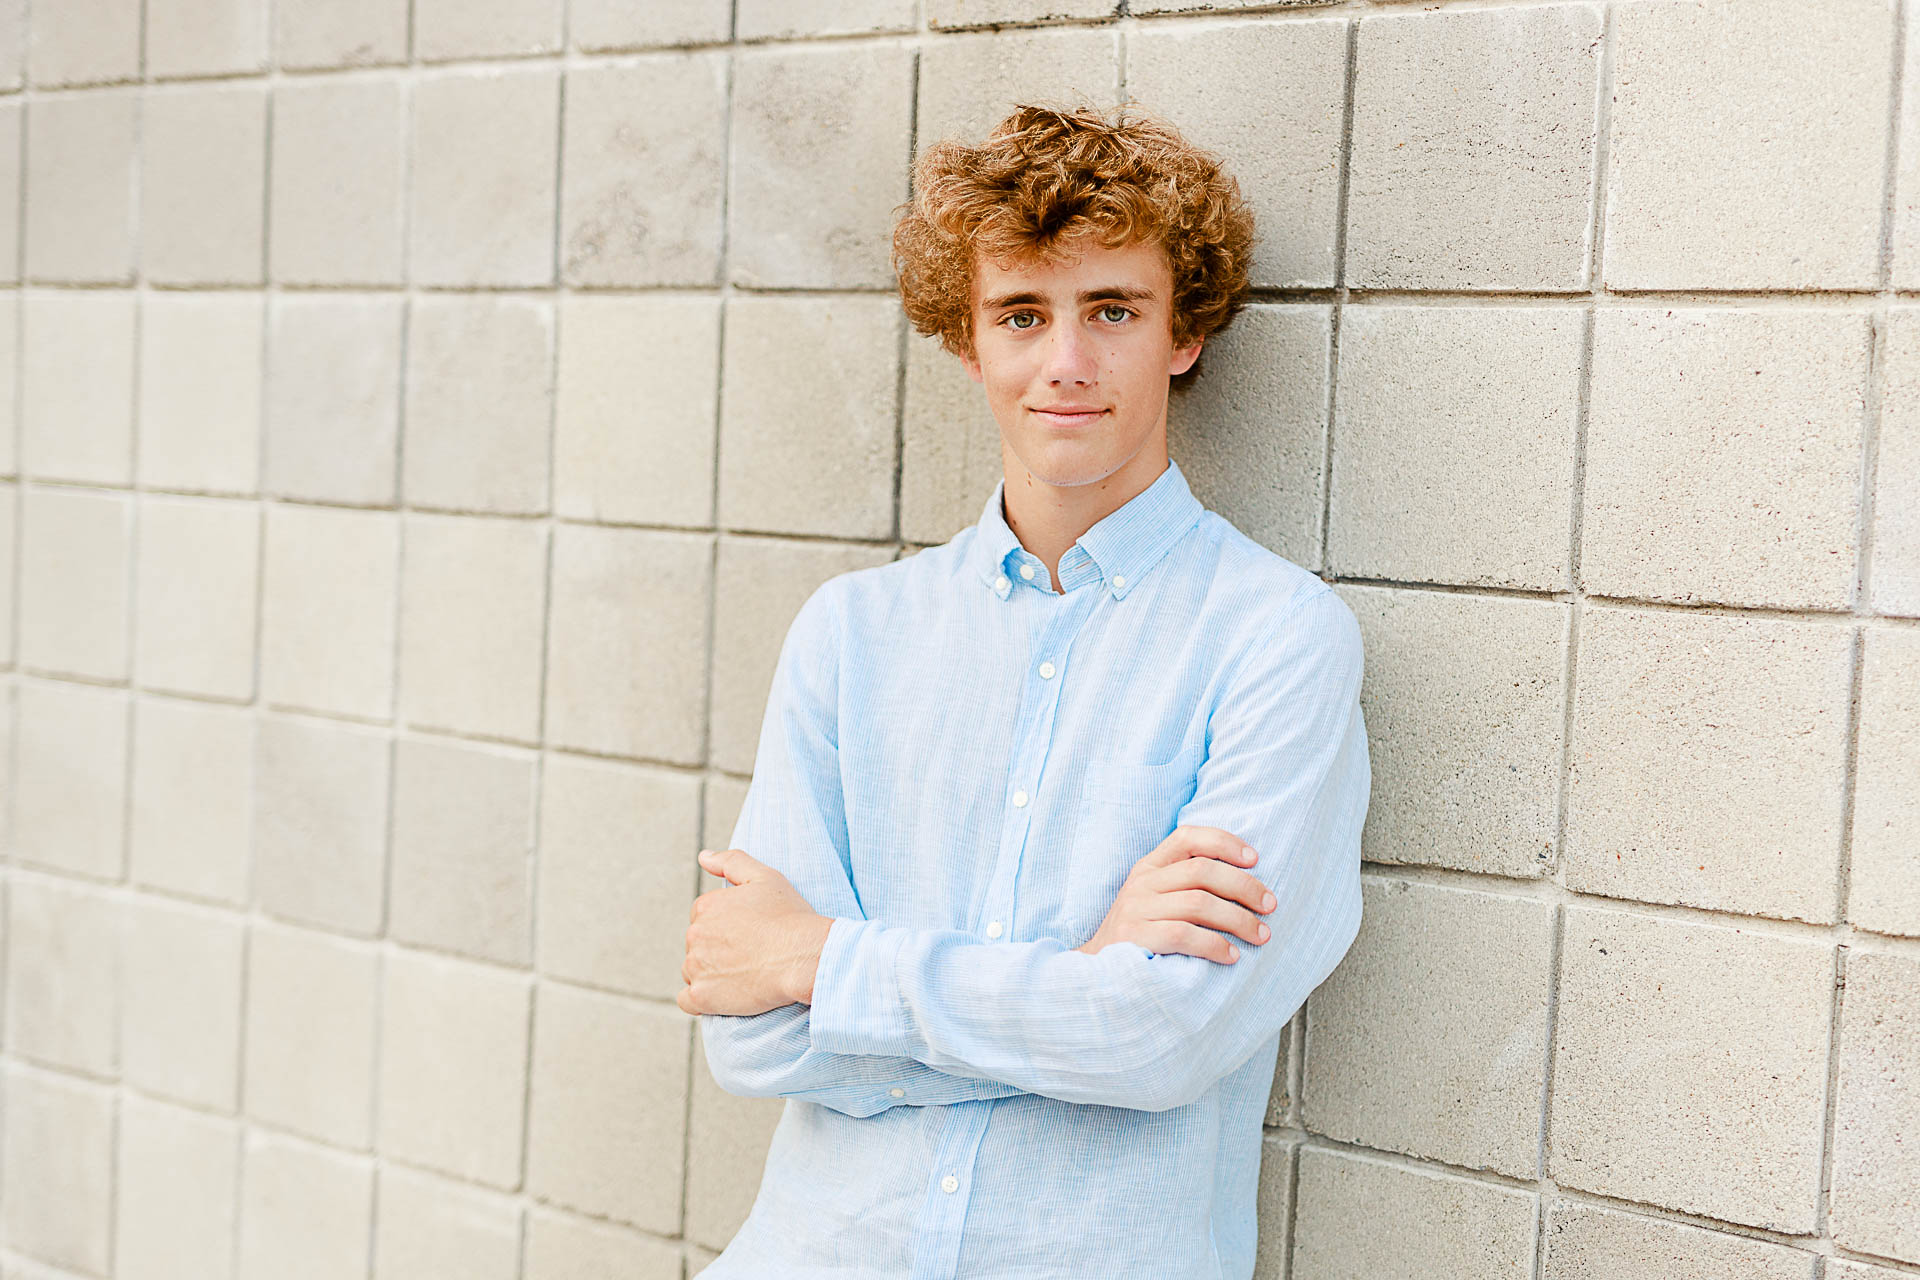 Photo by Scituate Senior Portrait Photographer Christina Runnals | High school senior boy leaning against a wall